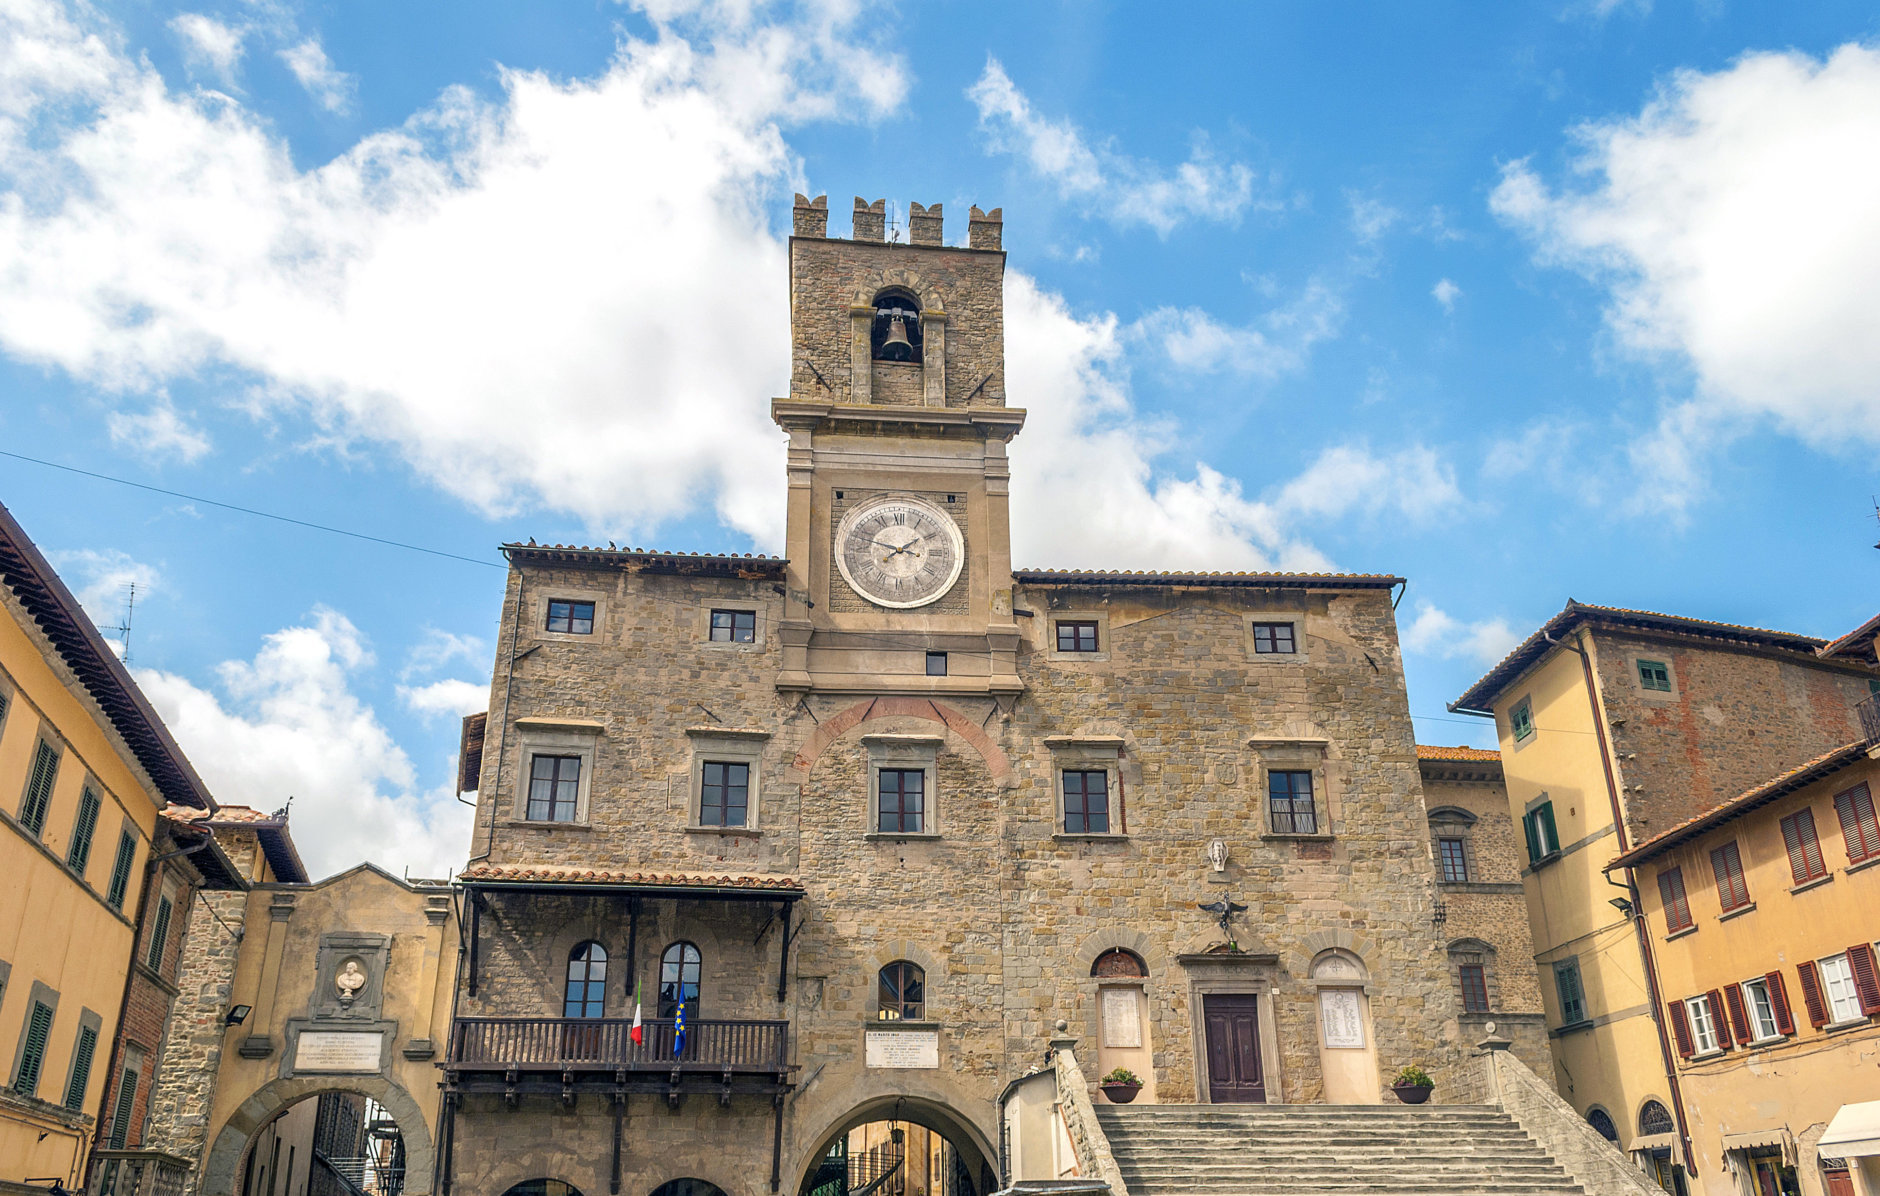 view of the town hall in the medieval city of Cortona, Tuscan , Italy